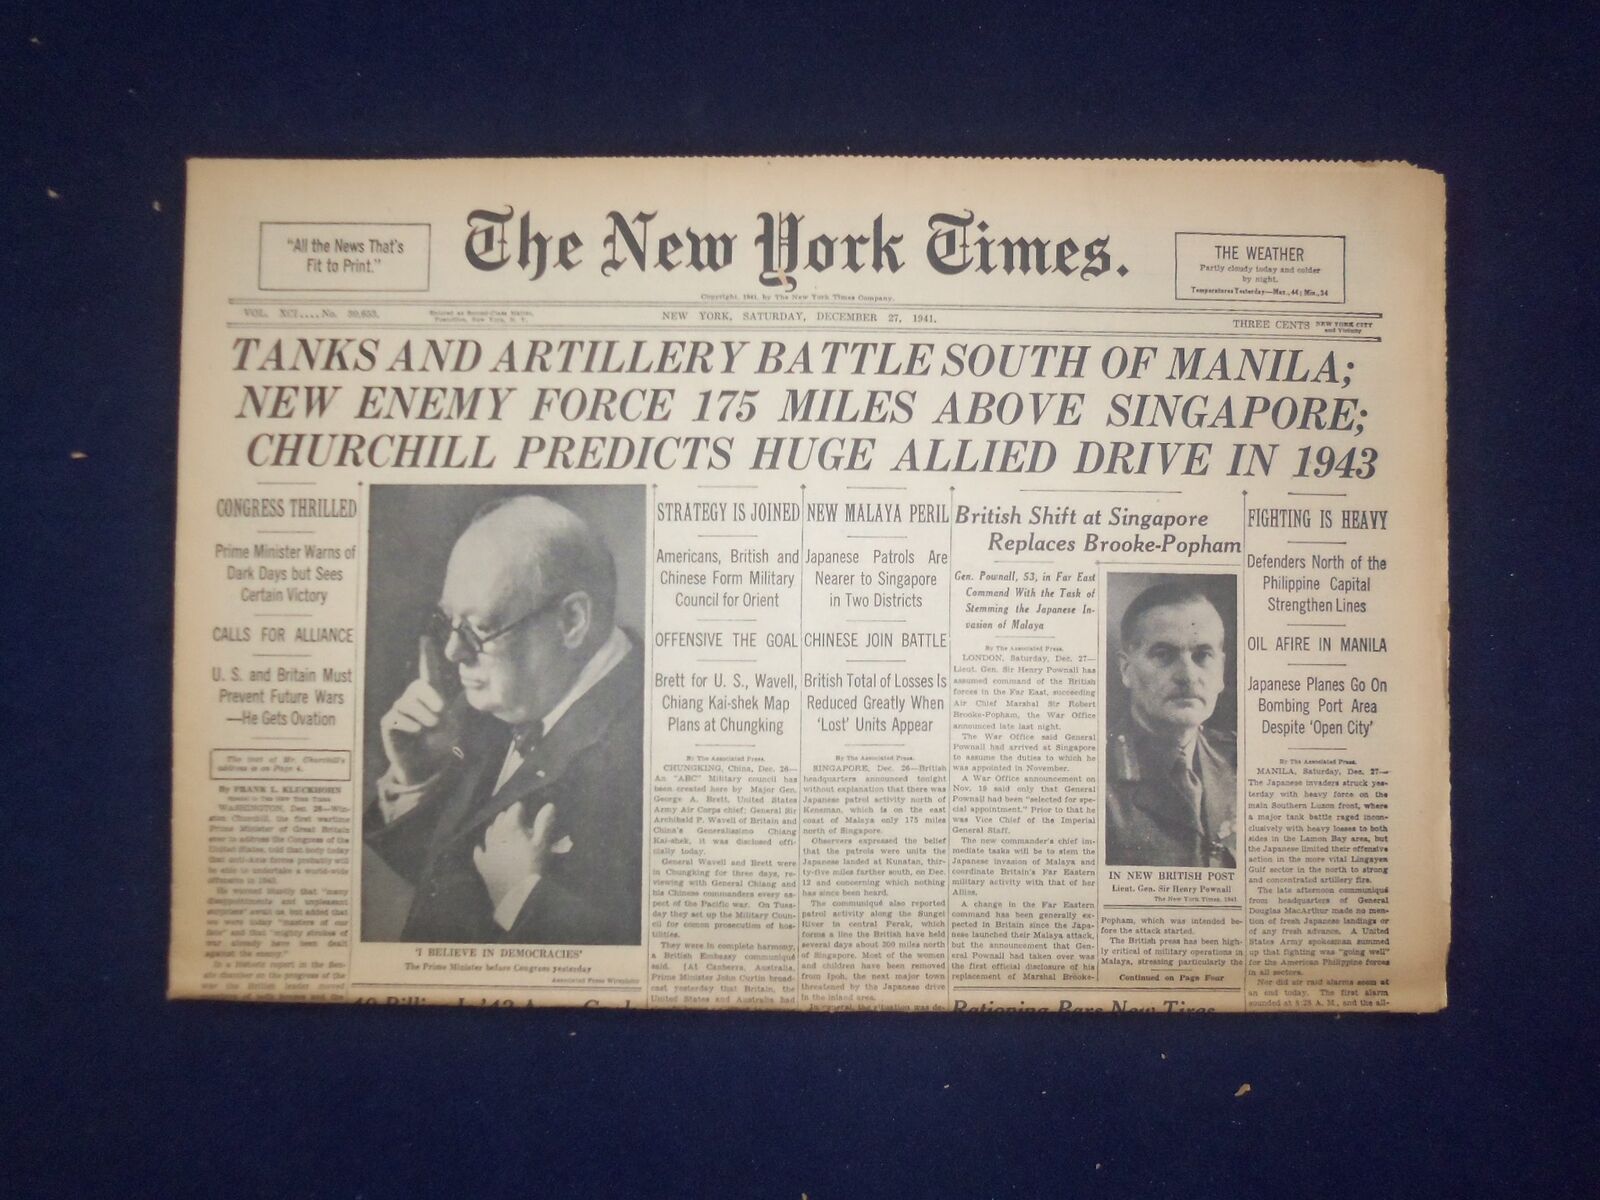 1941 DEC 27 NEW YORK TIMES-CHURCHILL PREDICTS HUGE ALLIED DRIVE IN 1943- NP 6491